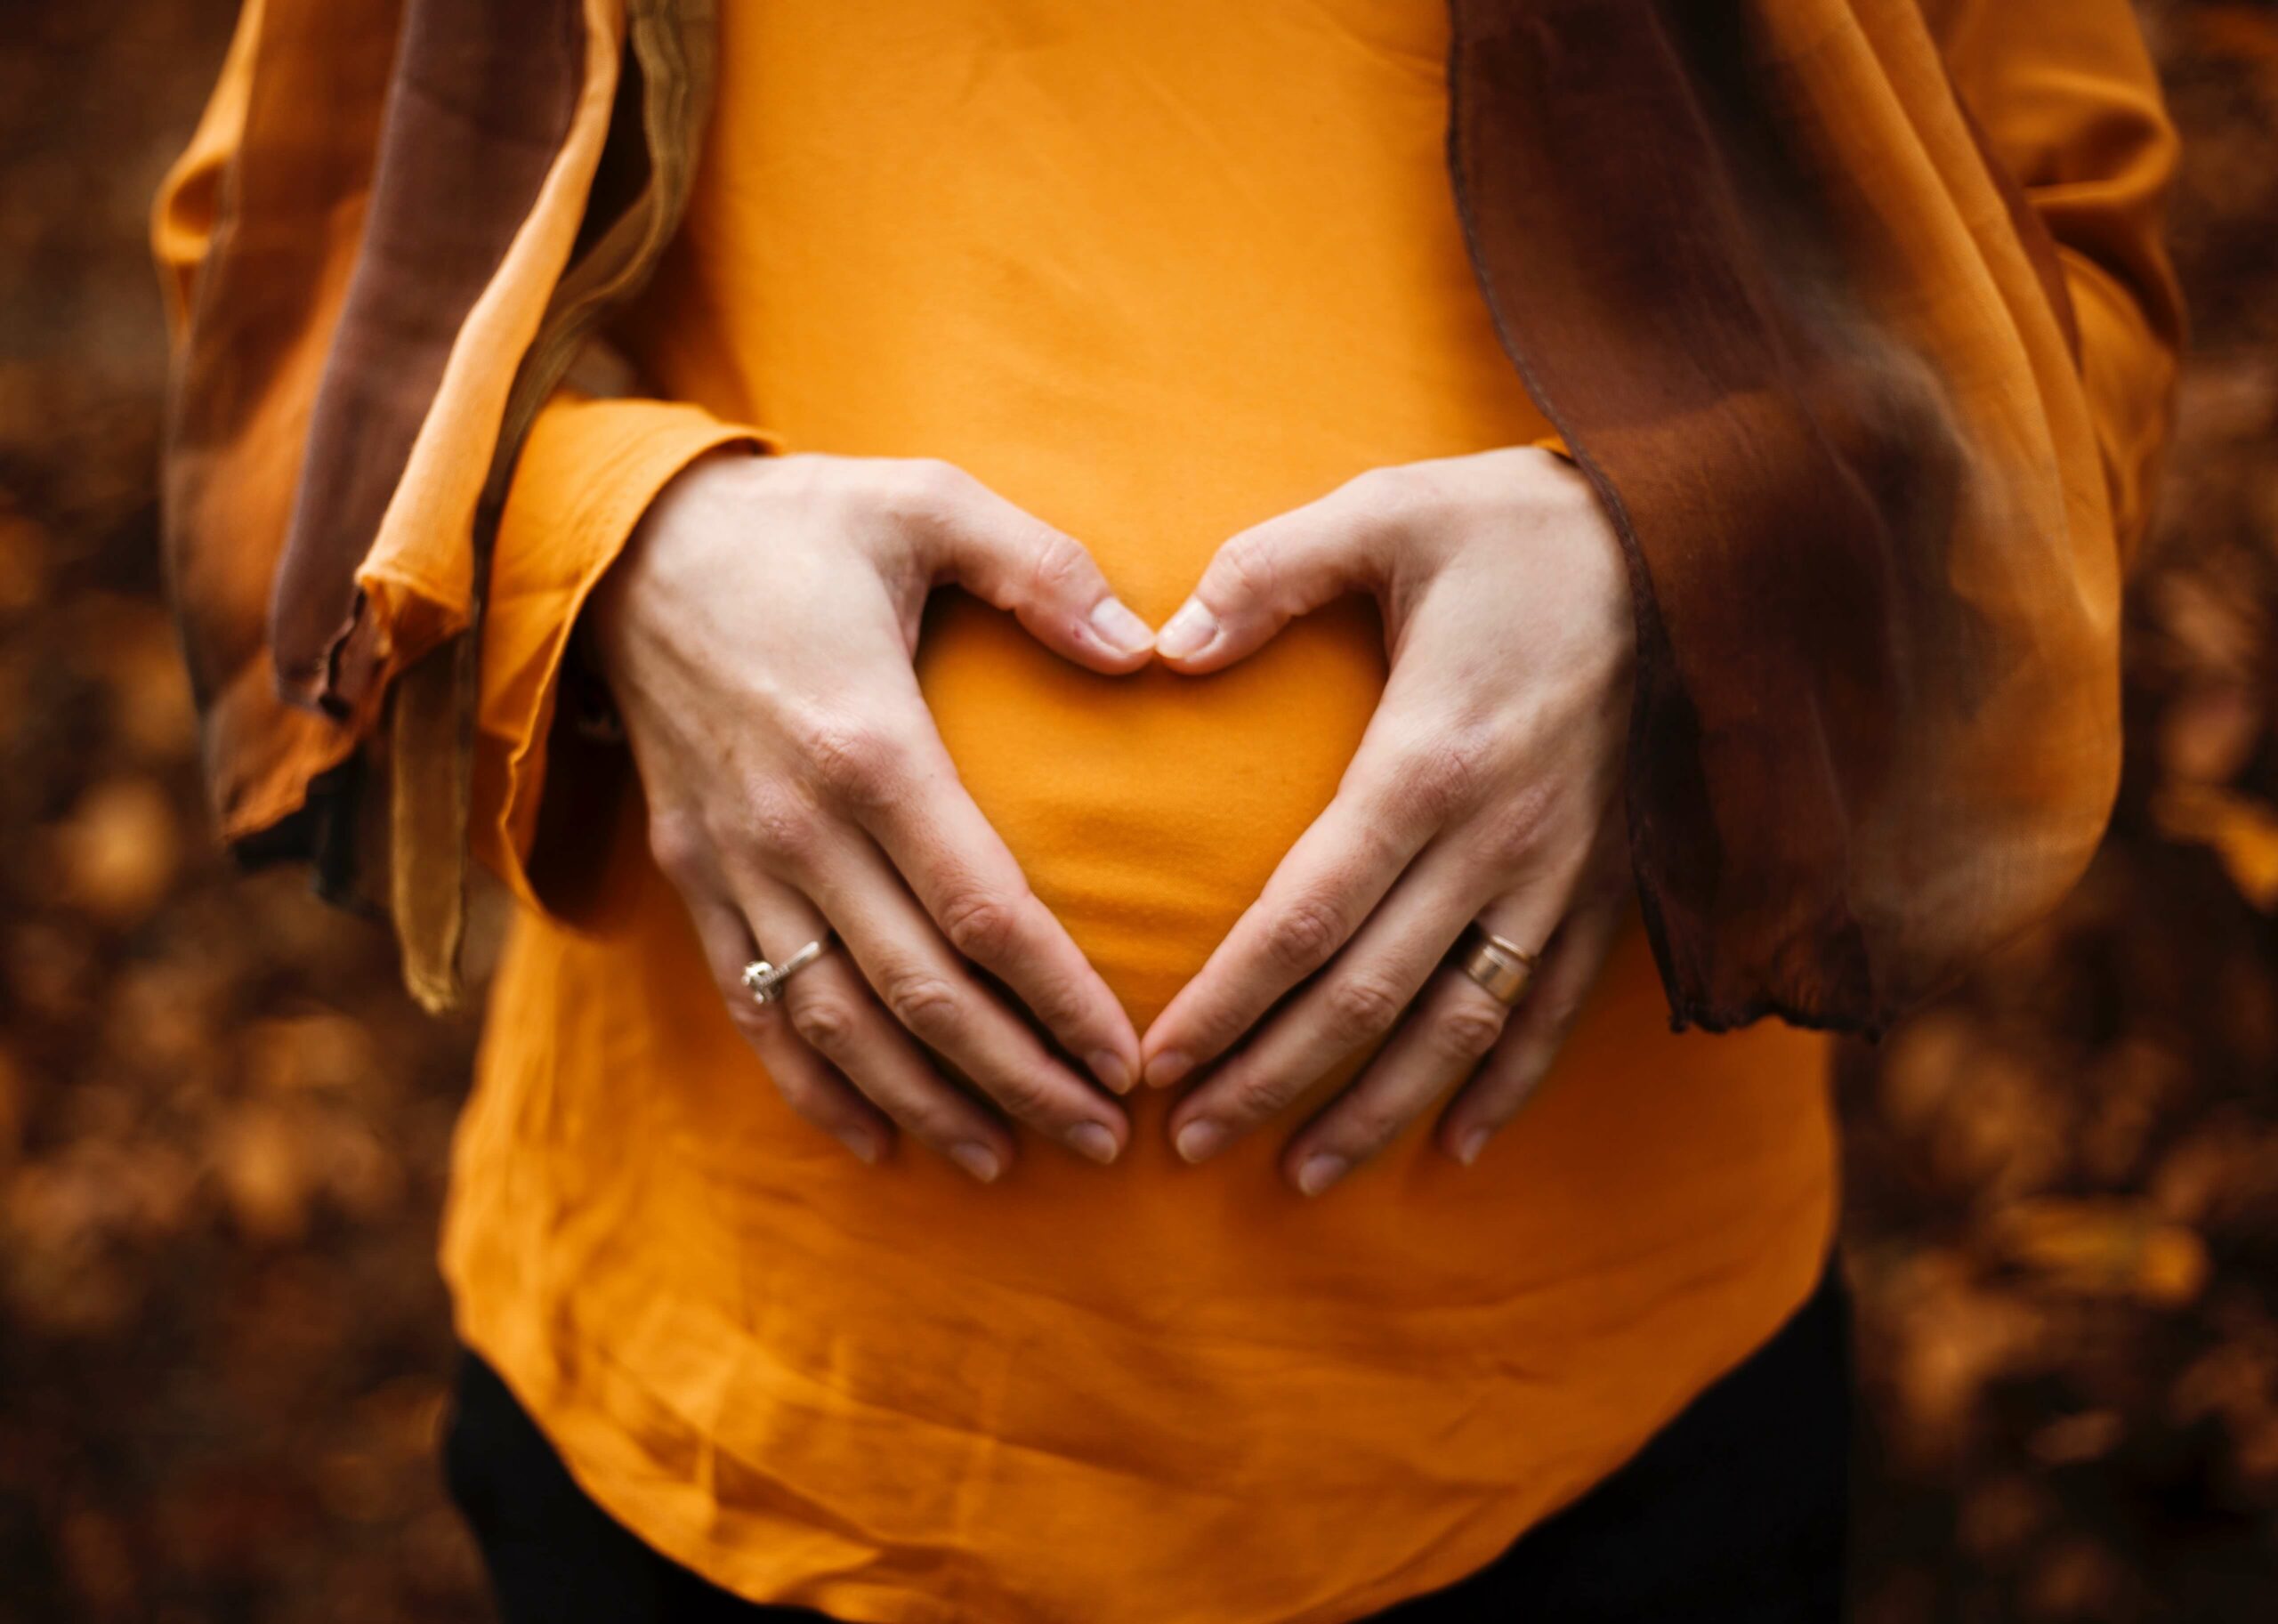 pregnant lady with hands in heart shape on belly